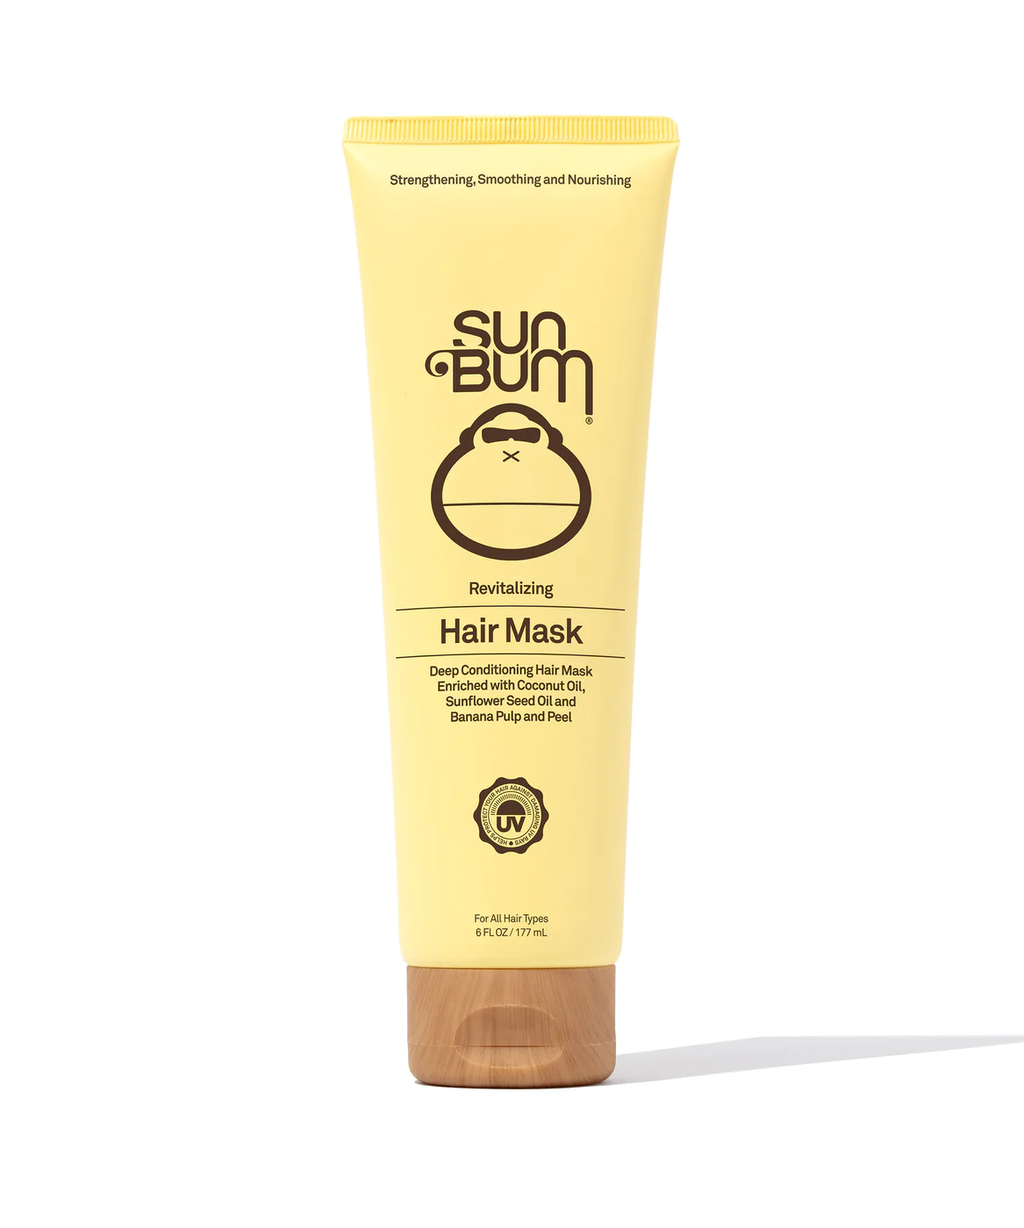 SunBum hair mask product picture